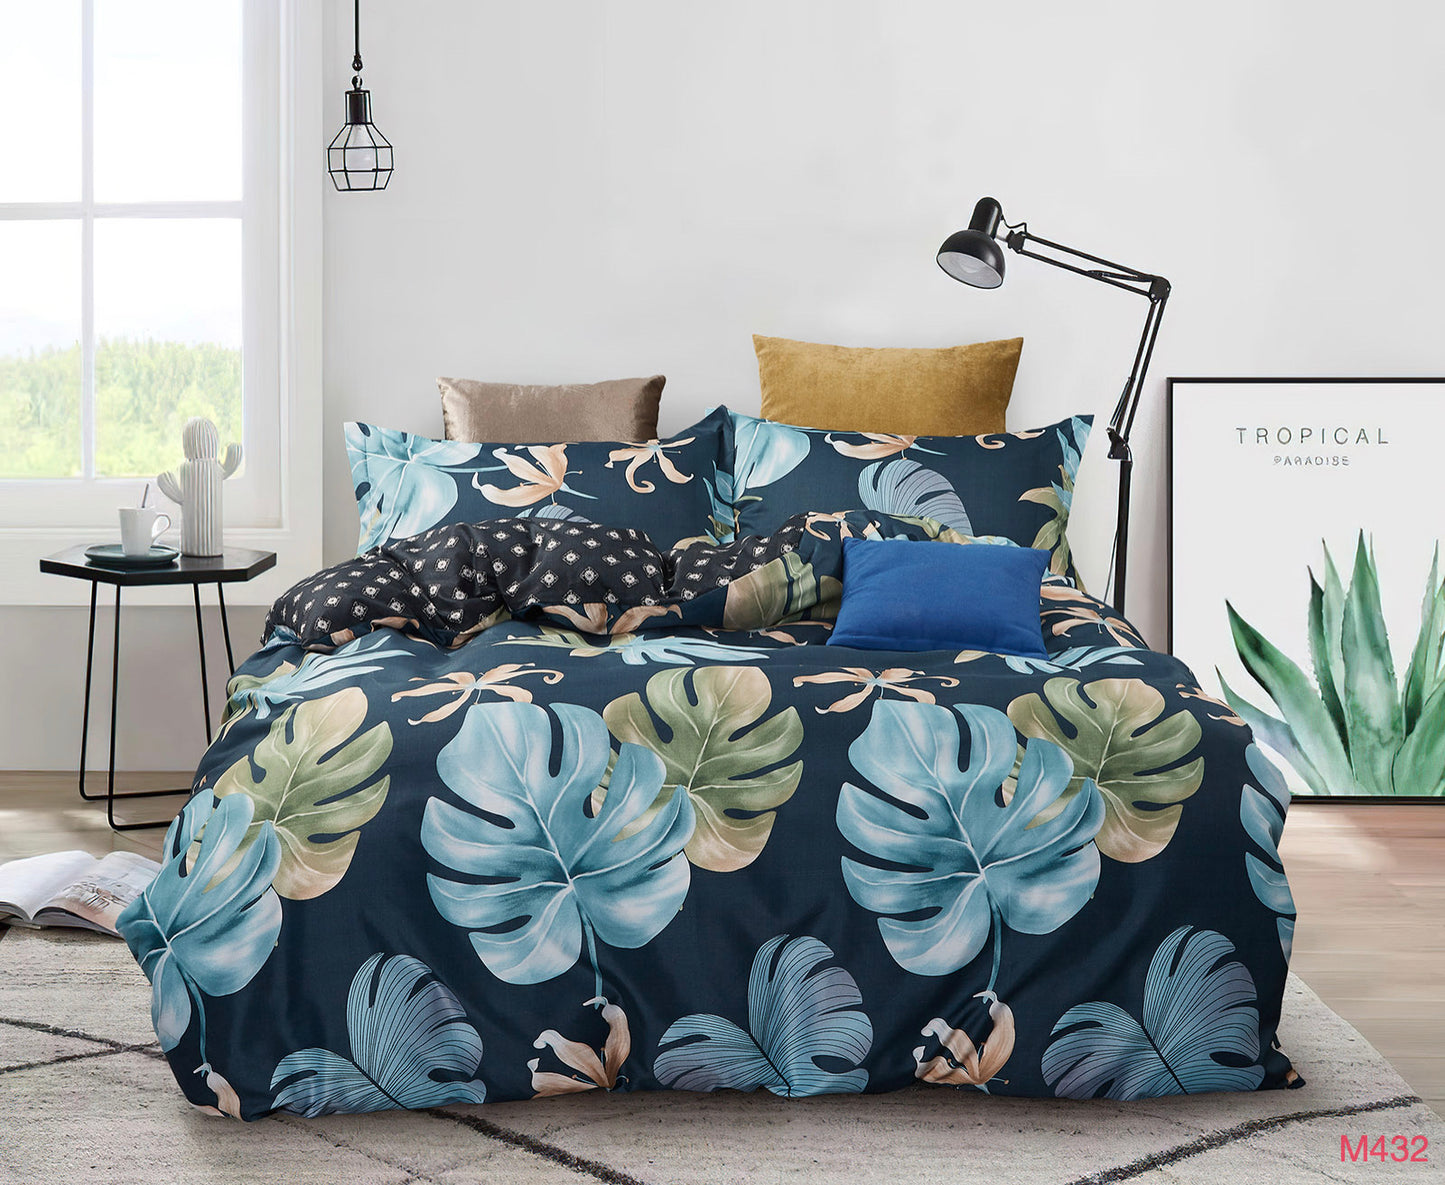 Geometrical Floral Queen/King/Super King Size Bed Doona/Duvet/Quilt Cover Set Collection